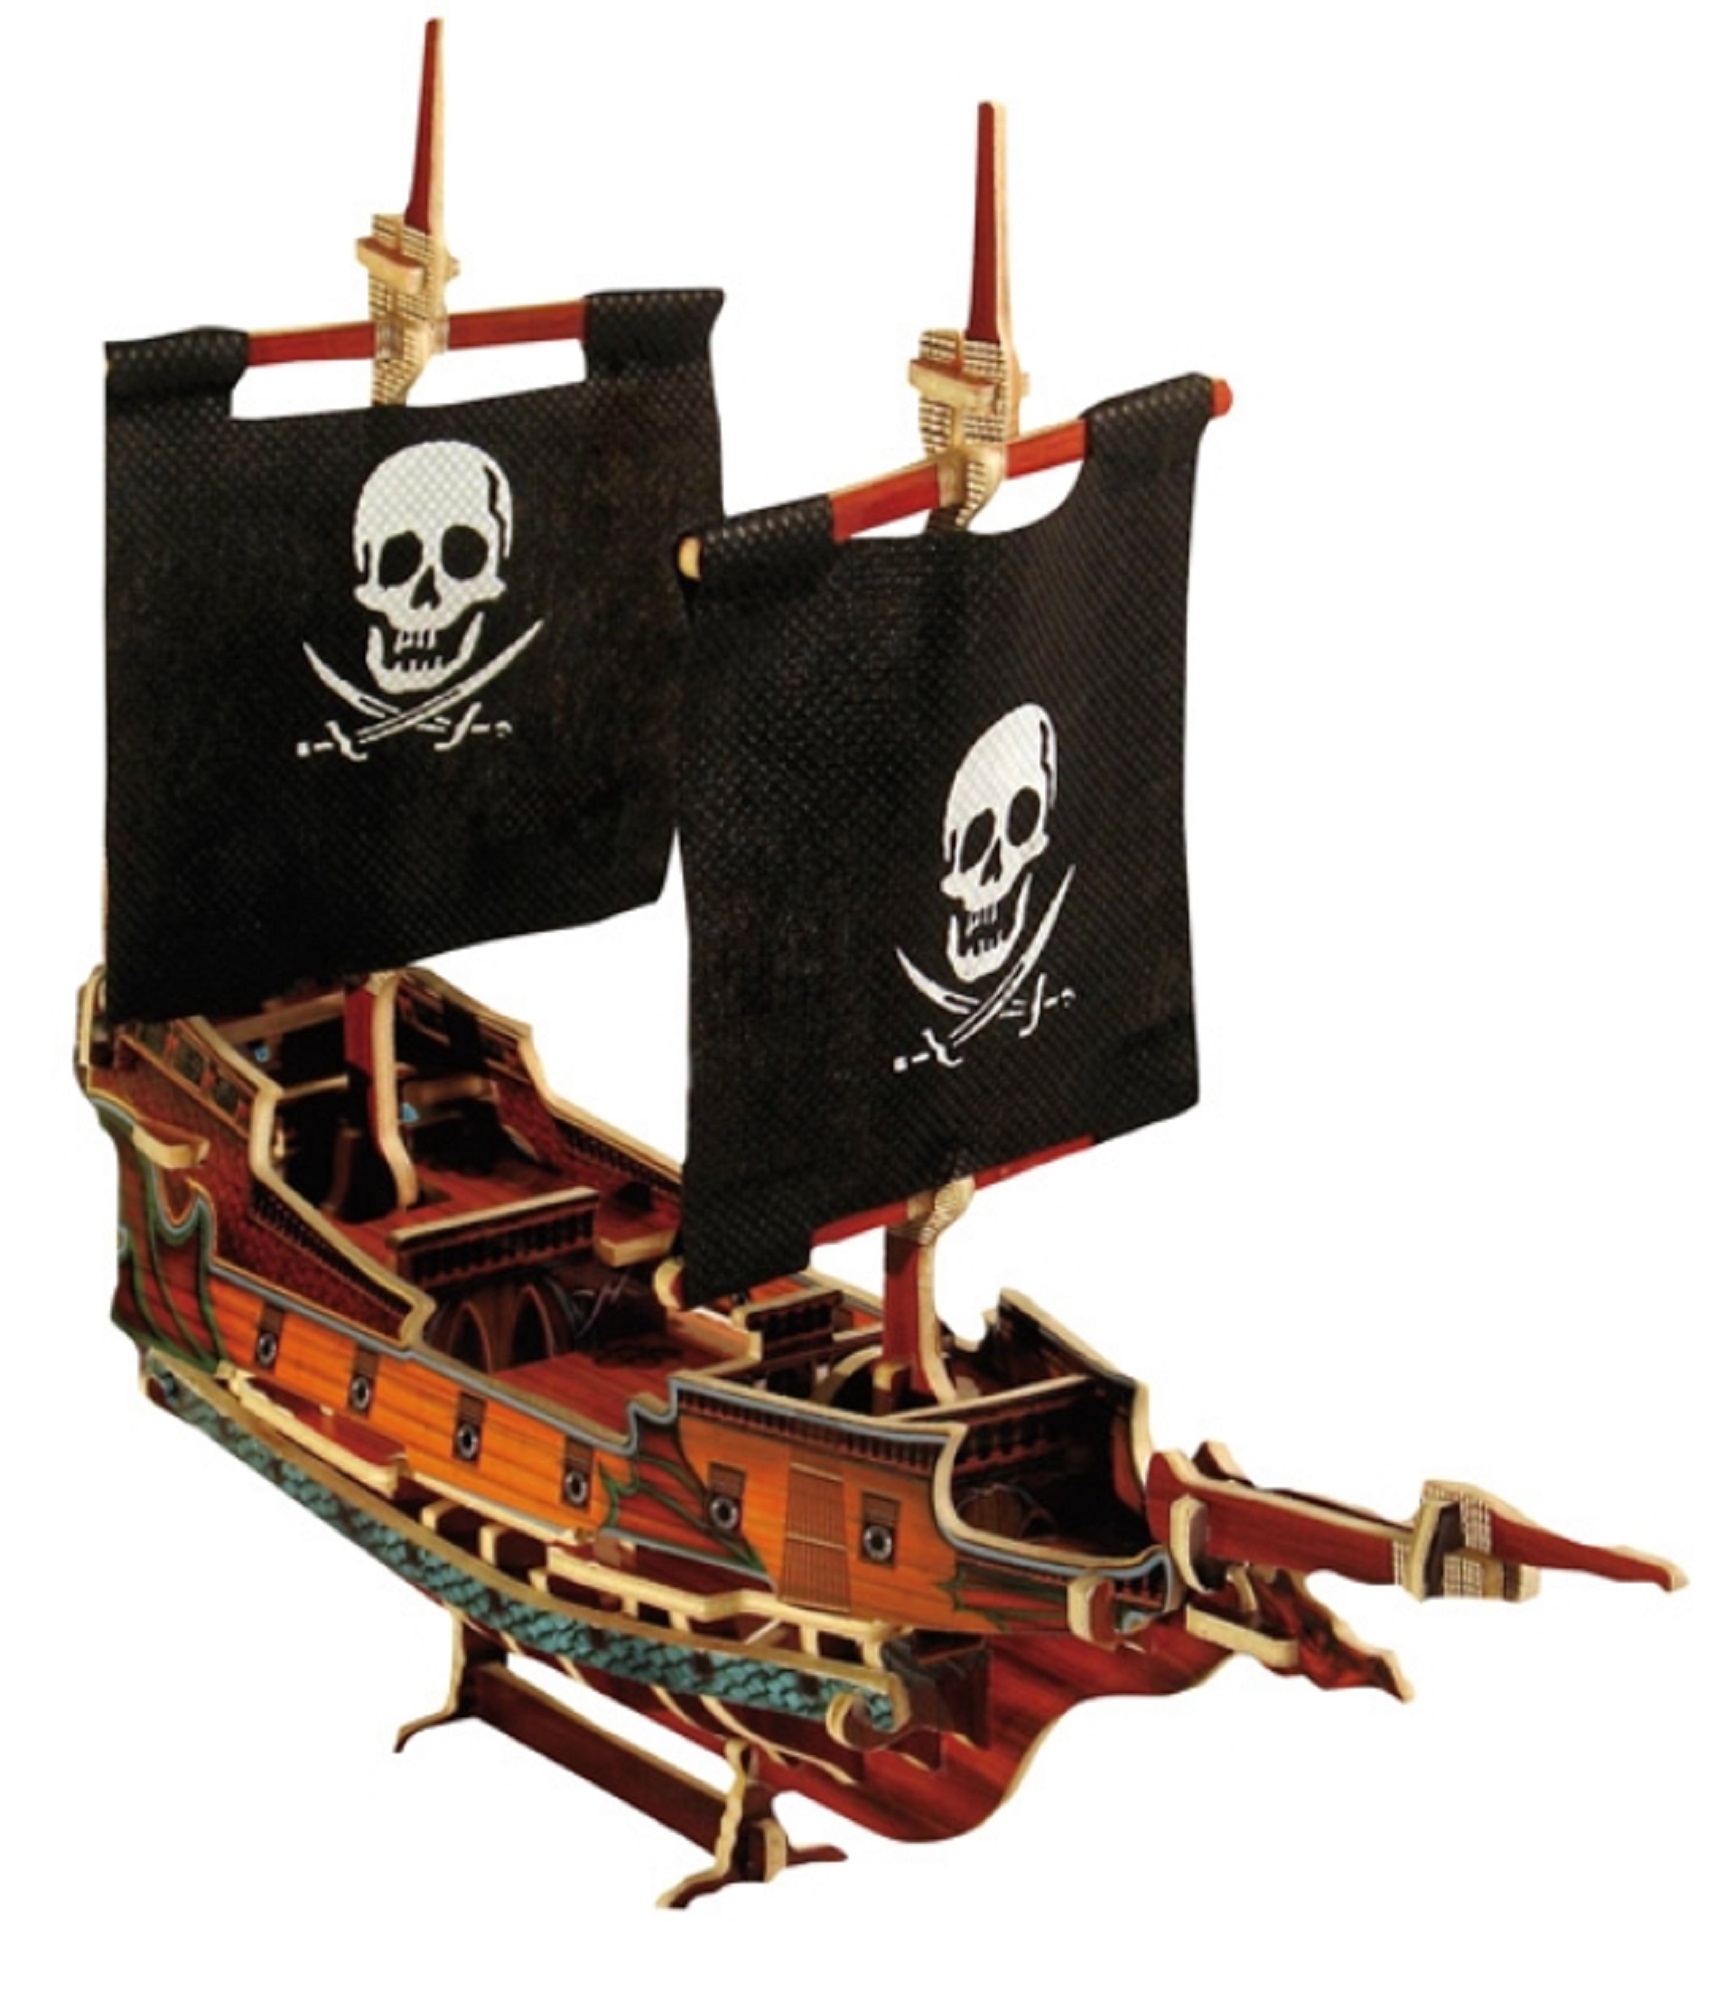 3D Wooden Pirate Ship Jack Puzzle, Pirate Ship Kit